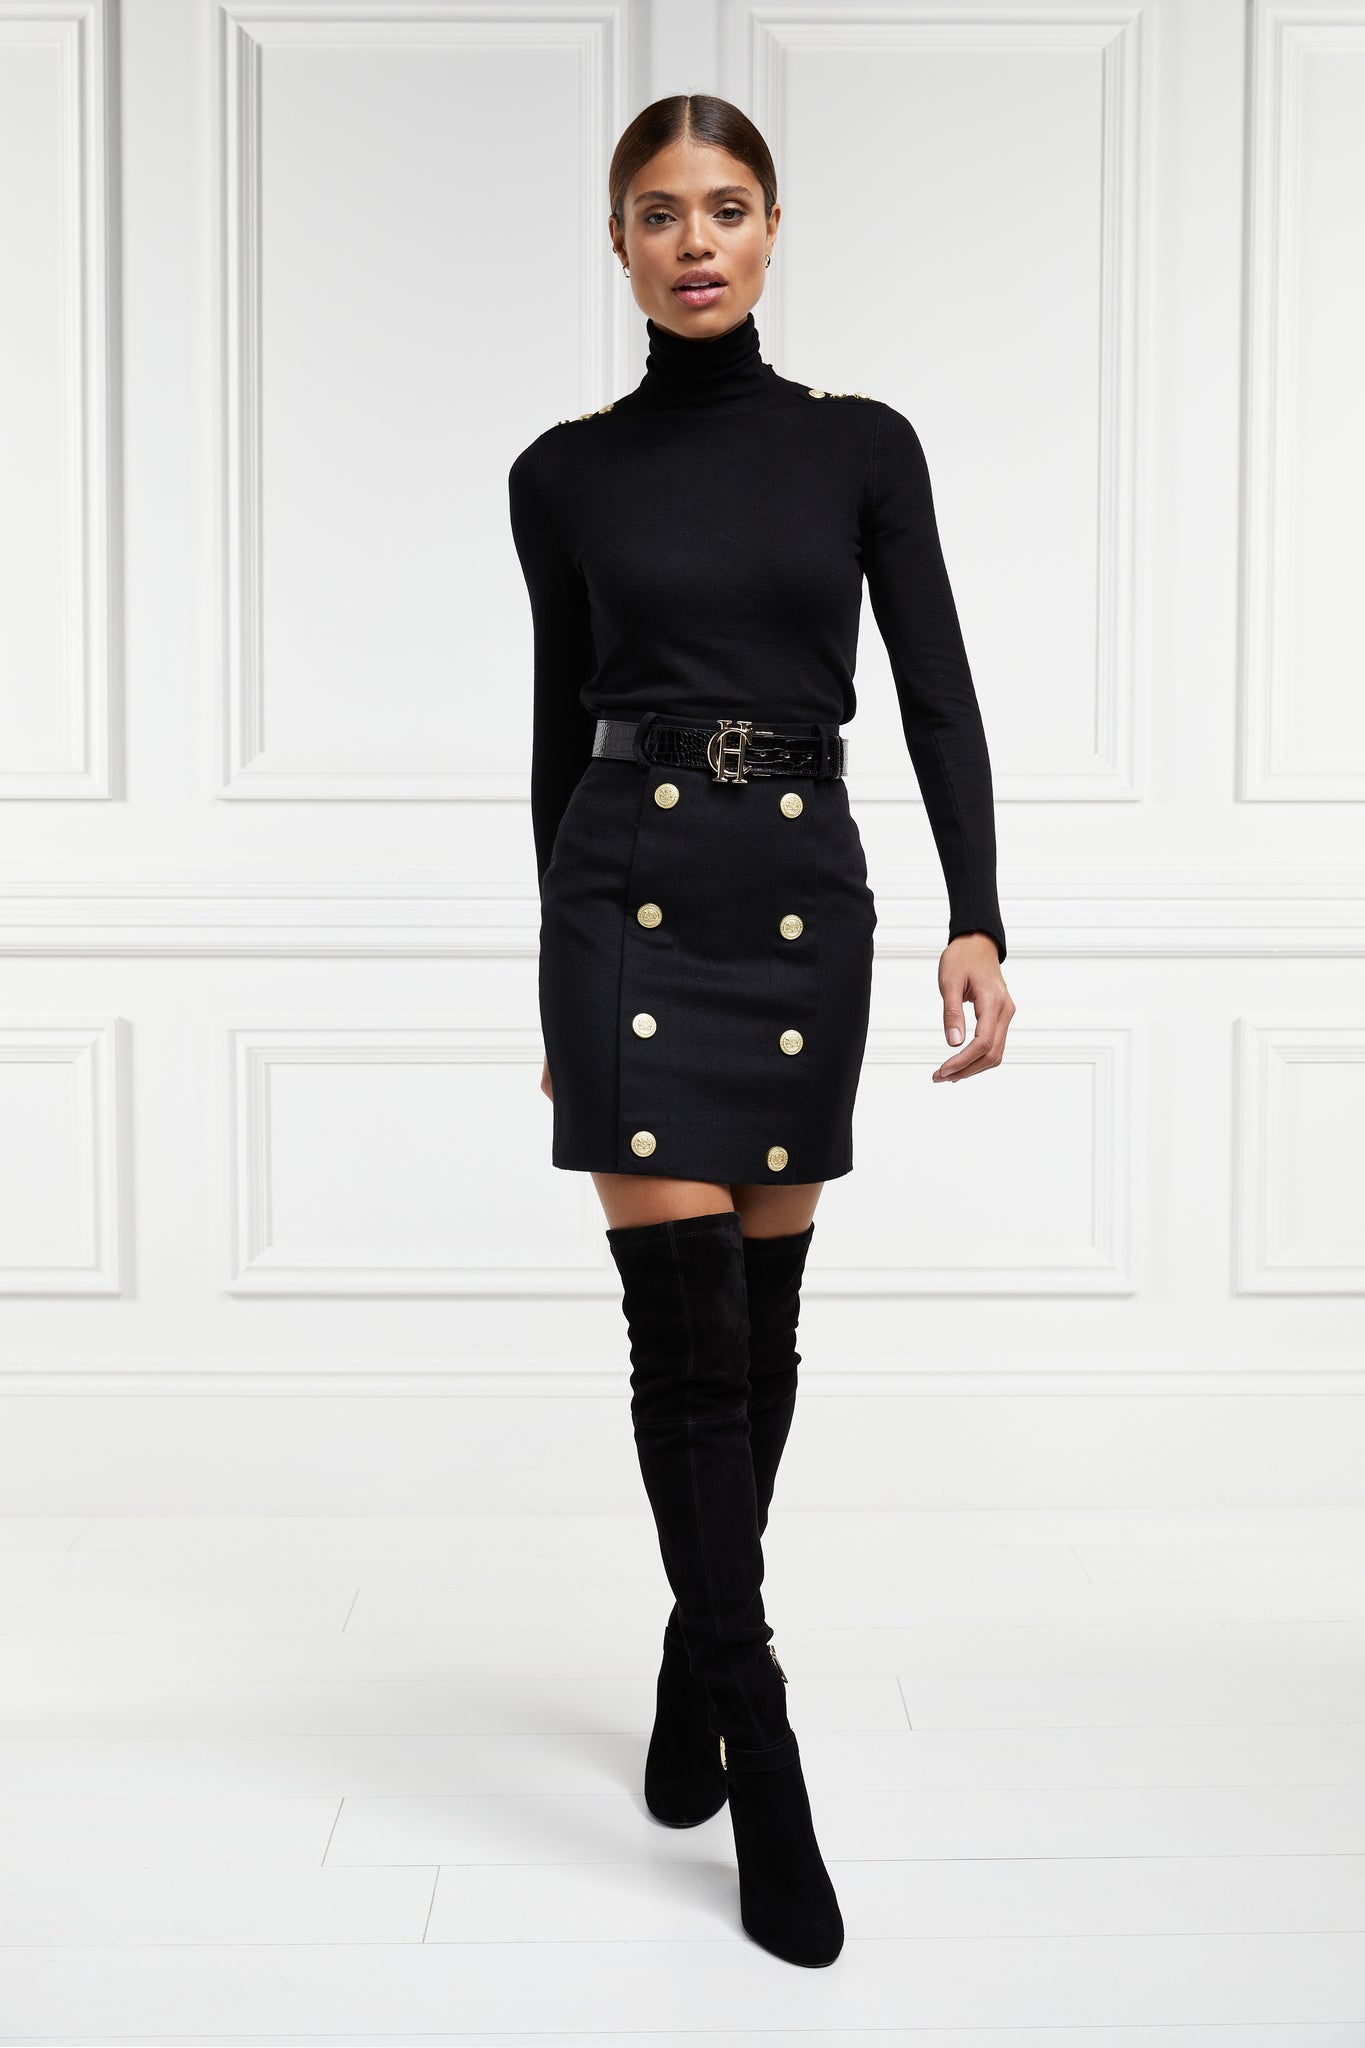 womens black wool pencil mini skirt with concealed zip fastening on centre back and gold rivets down front